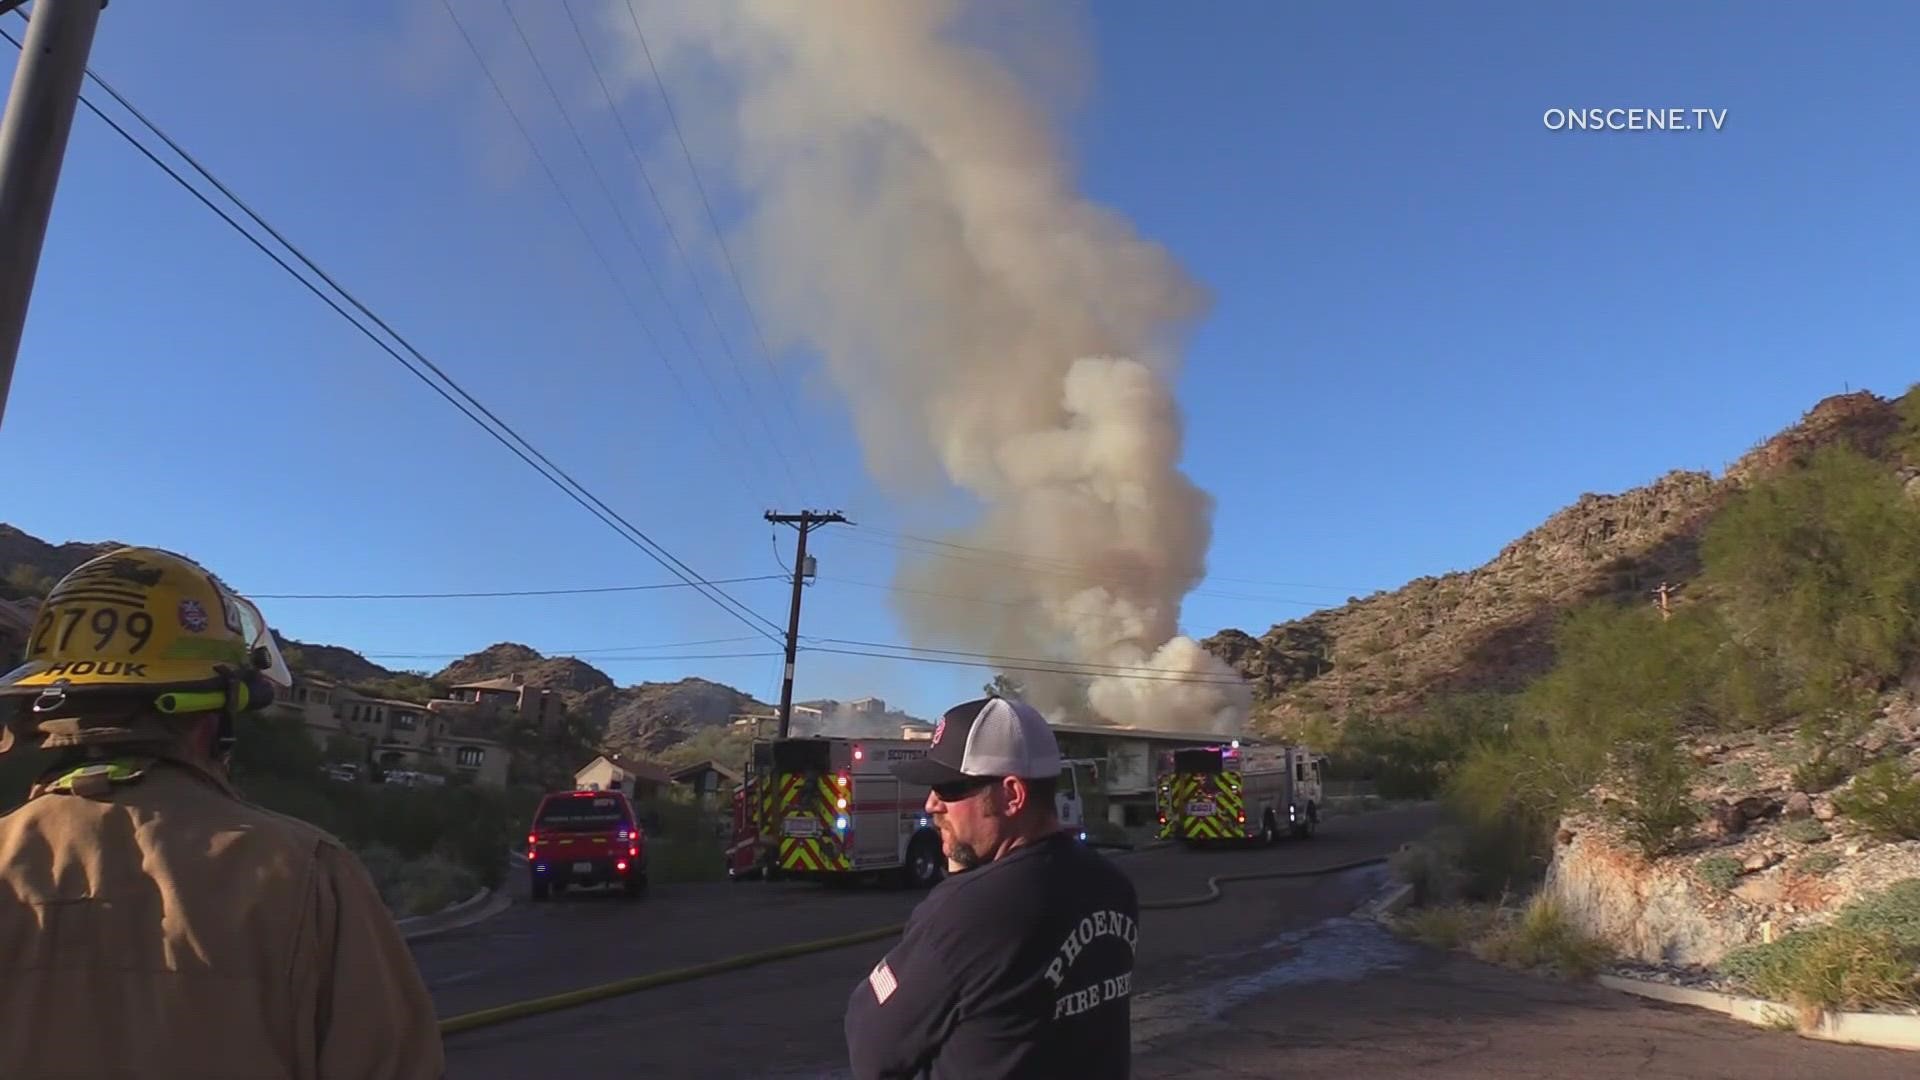 Fire crews are investigating a possible explosion at a home near the Phoenix Mountains Preserve that happened Saturday afternoon.